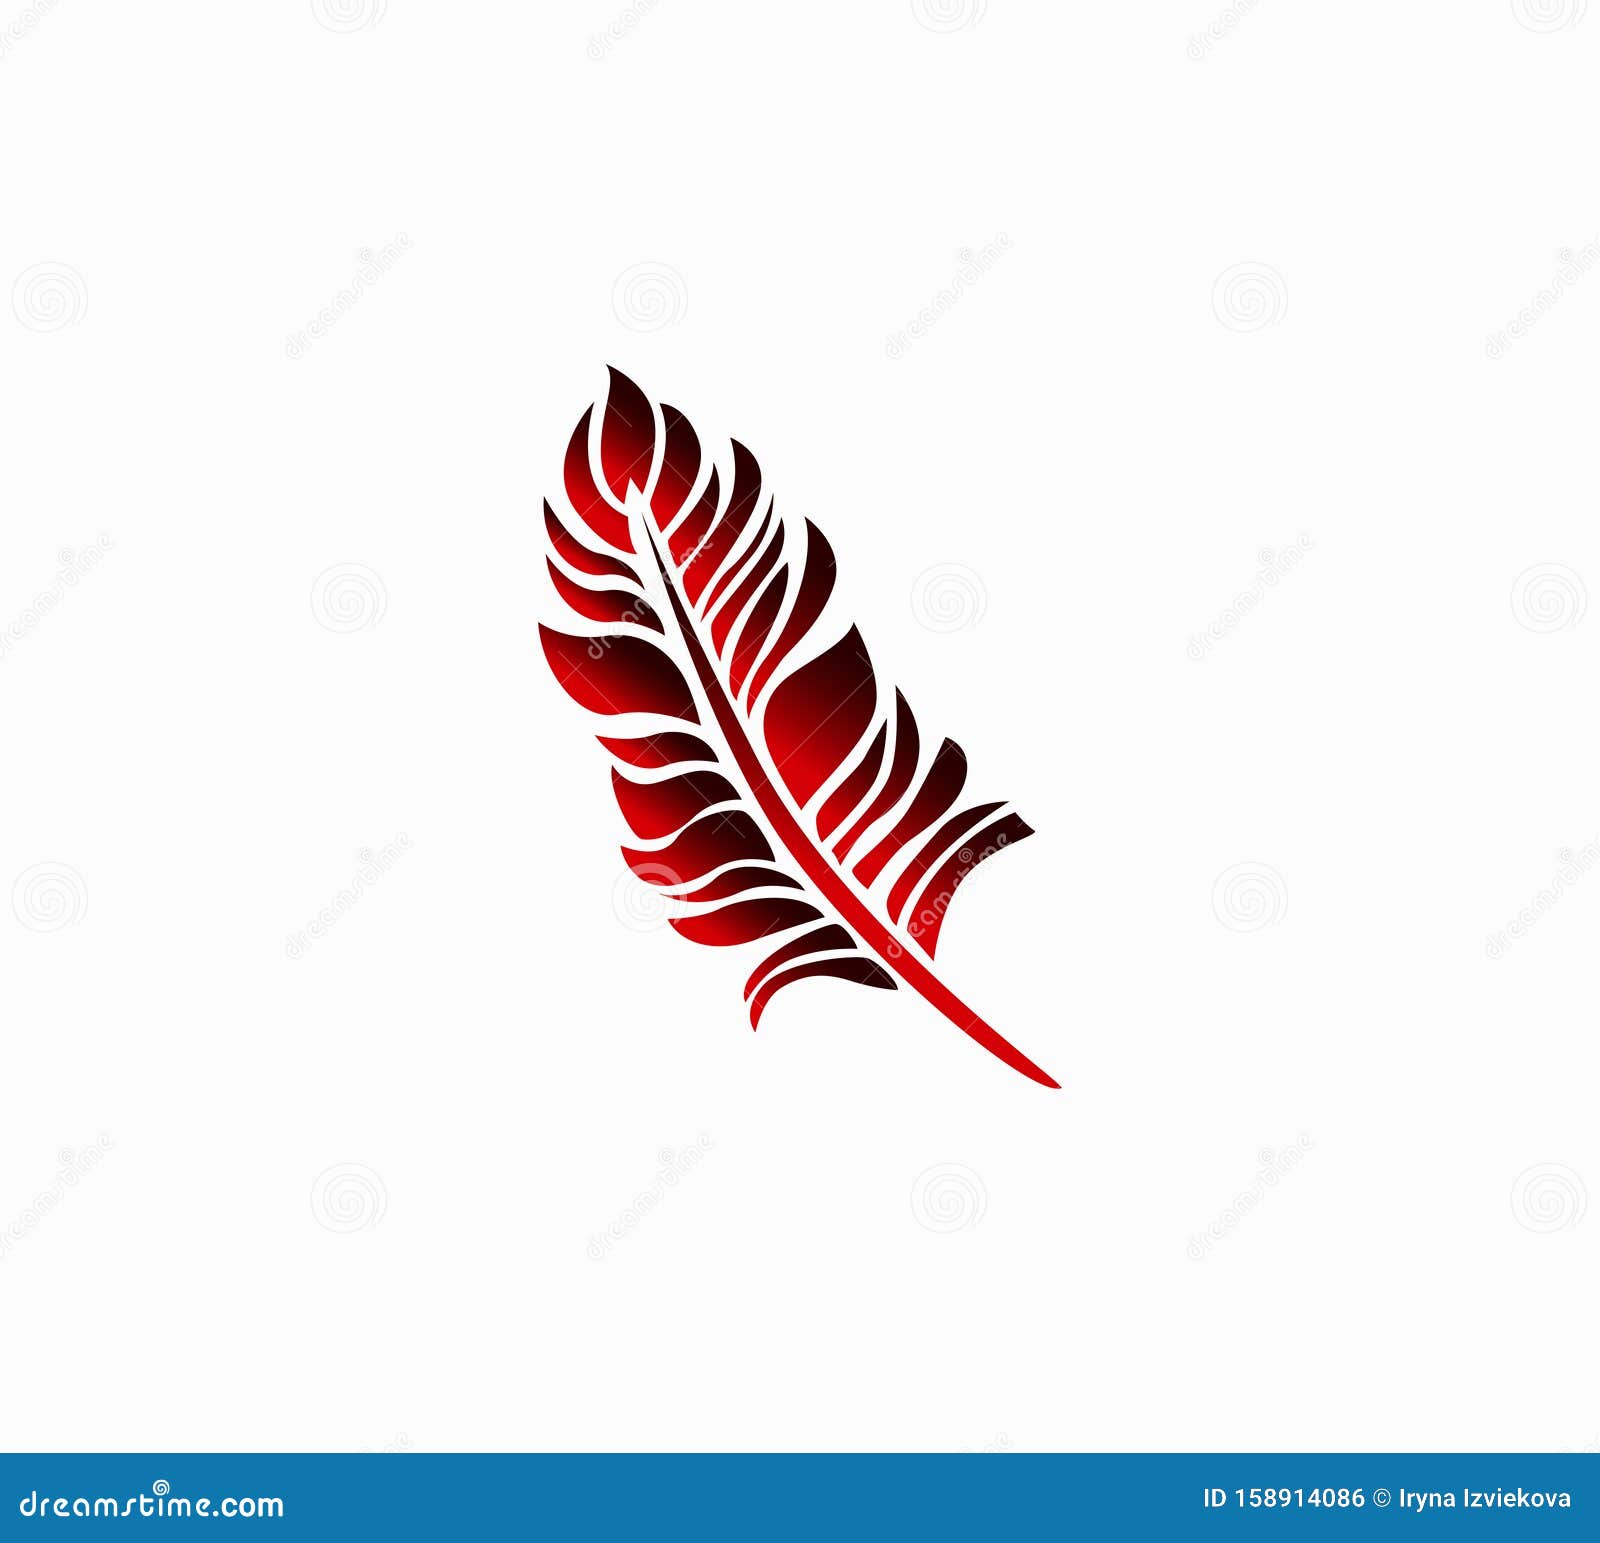 Vintage Burgundy Feather with Stylish Gradient Design. Stock Vector ...